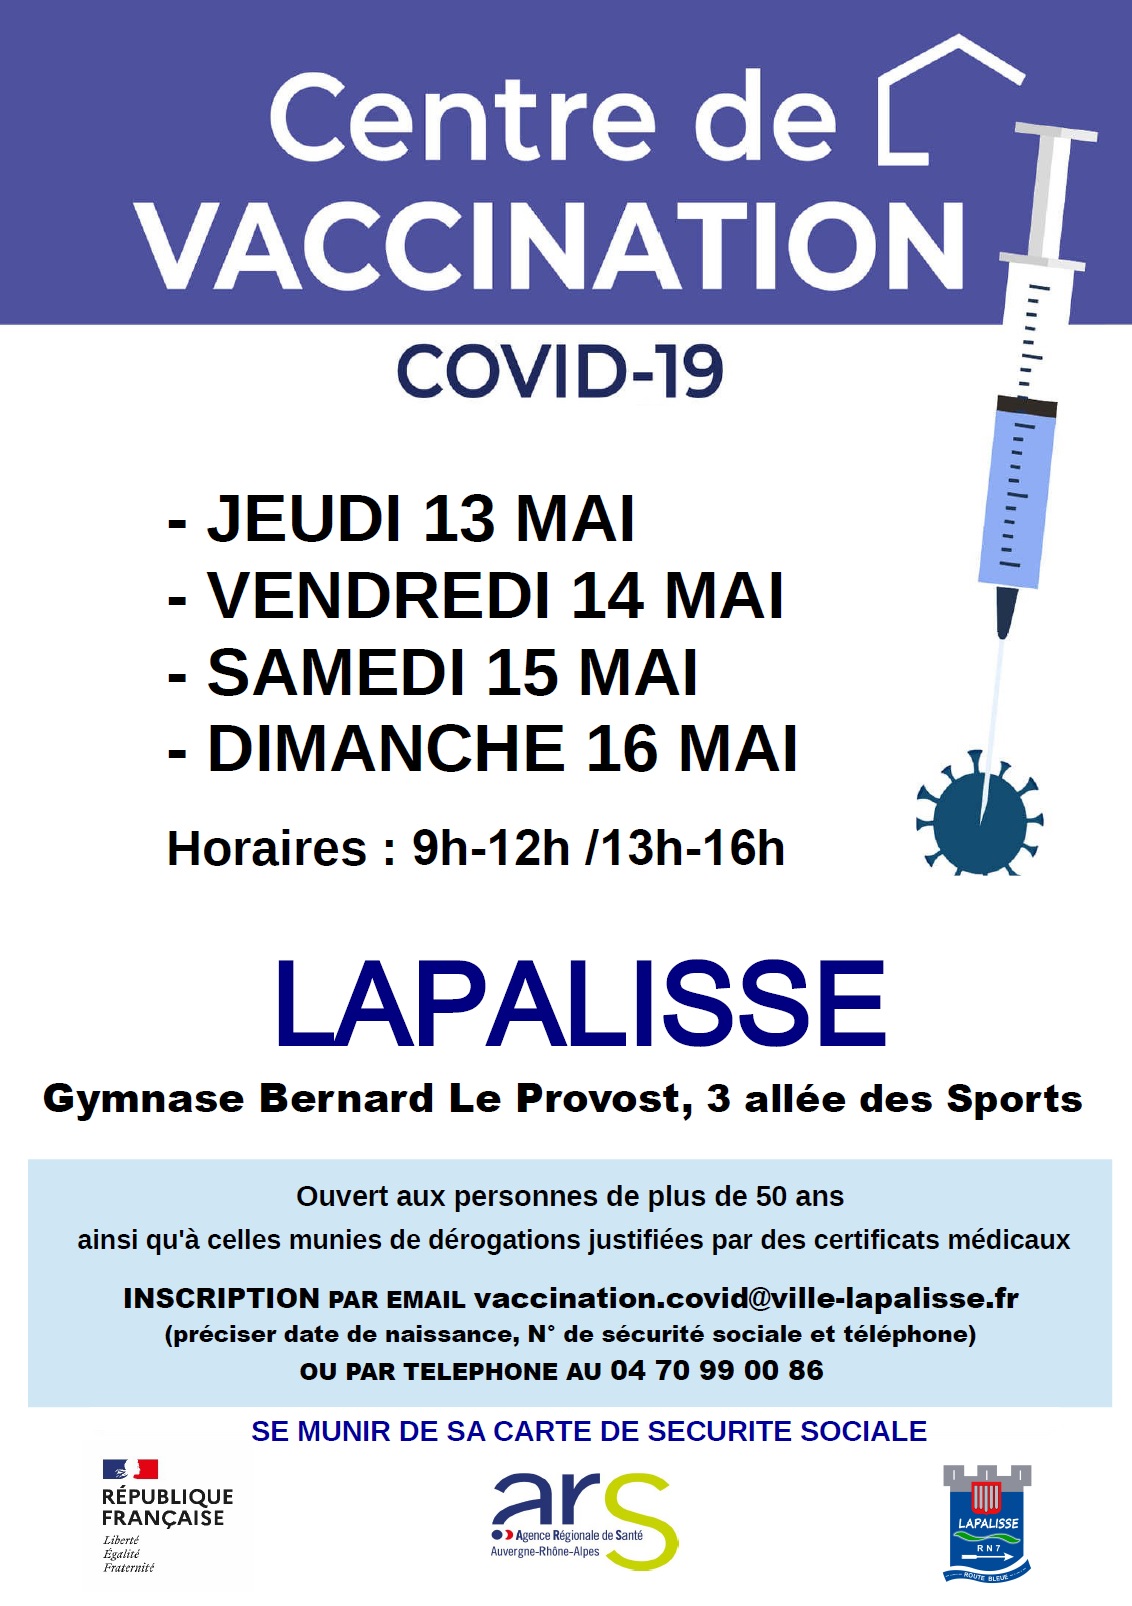 VACCINATION COVID-19 A LAPALISSE